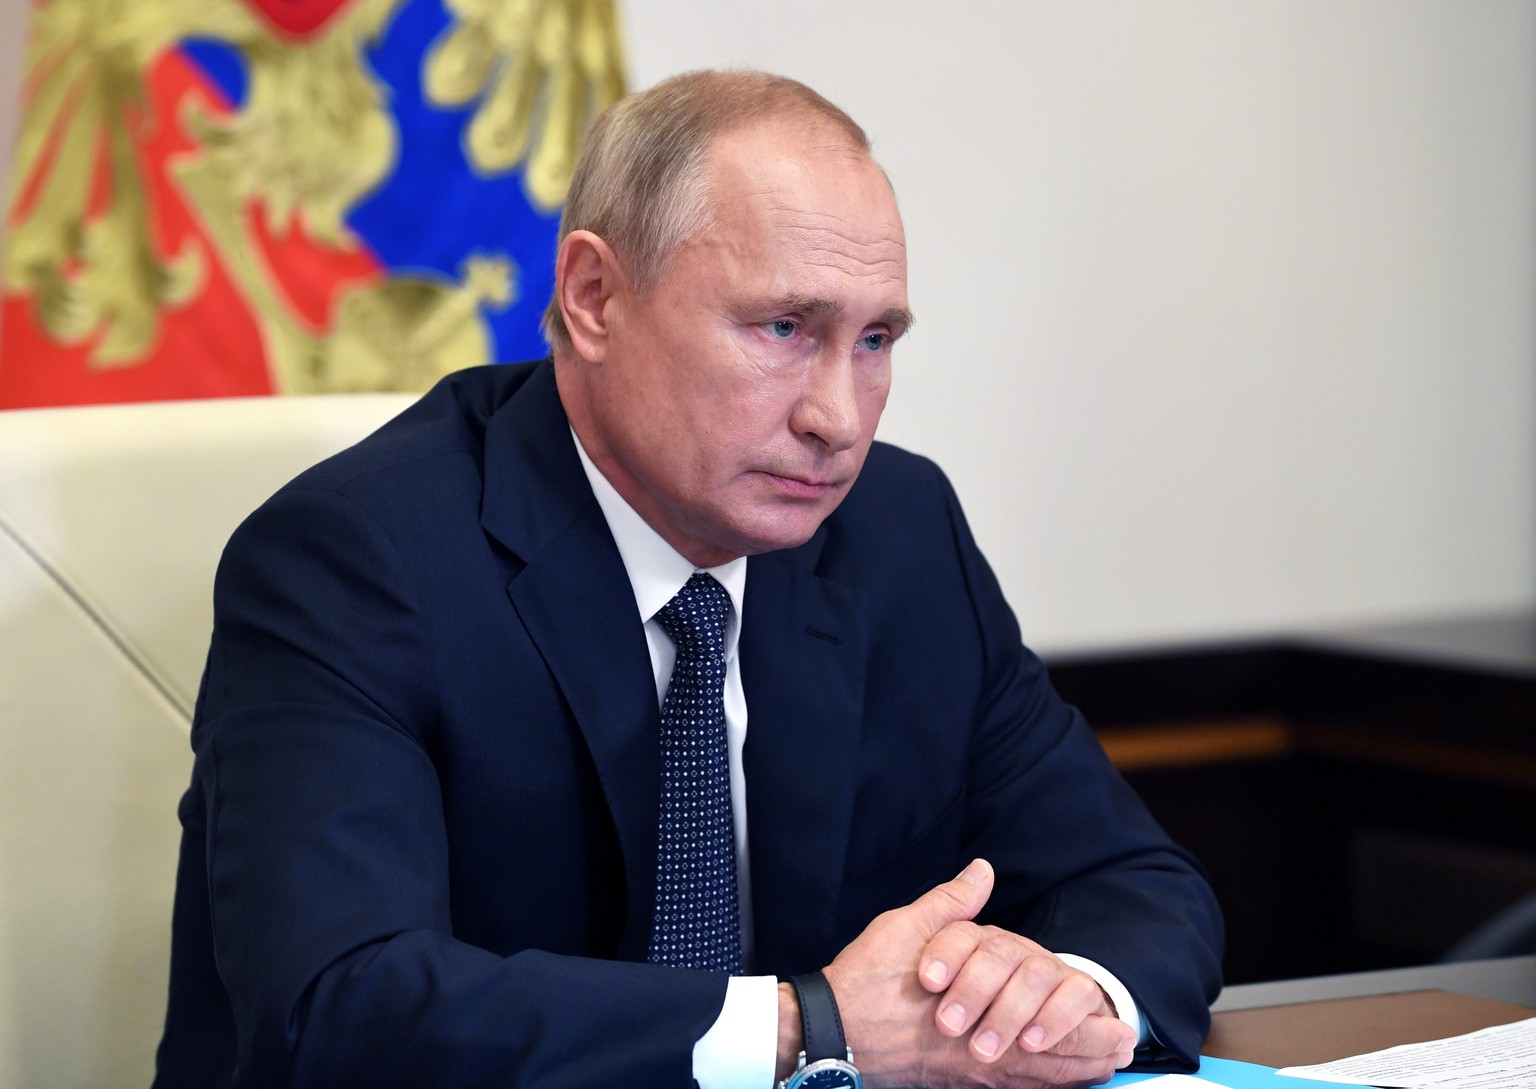 Russian President Vladimir Putin attends a cabinet meeting at the Novo-Ogaryovo residence outside Moscow, Russia, Tuesday, Aug. 11, 2020. Putin says that a coronavirus vaccine developed in the country ...